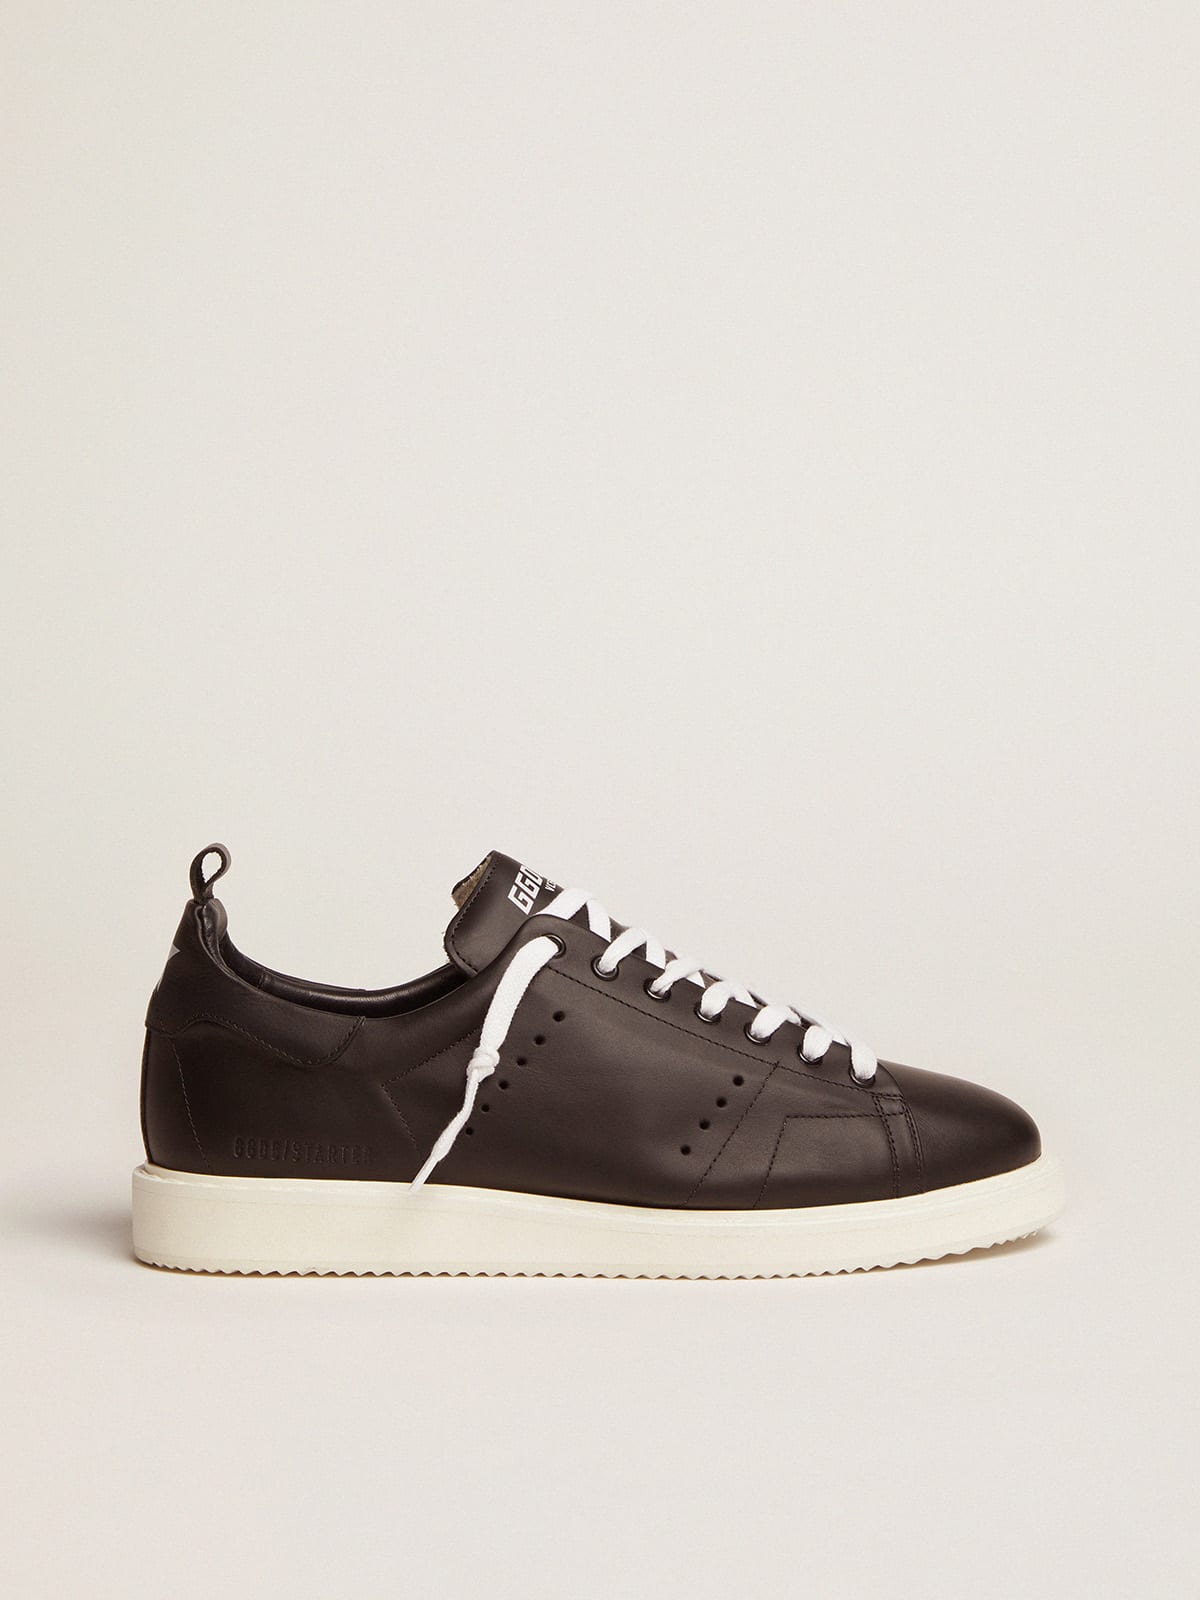 Golden Goose - Men's Starter in leather with star printed on the heel tab in 